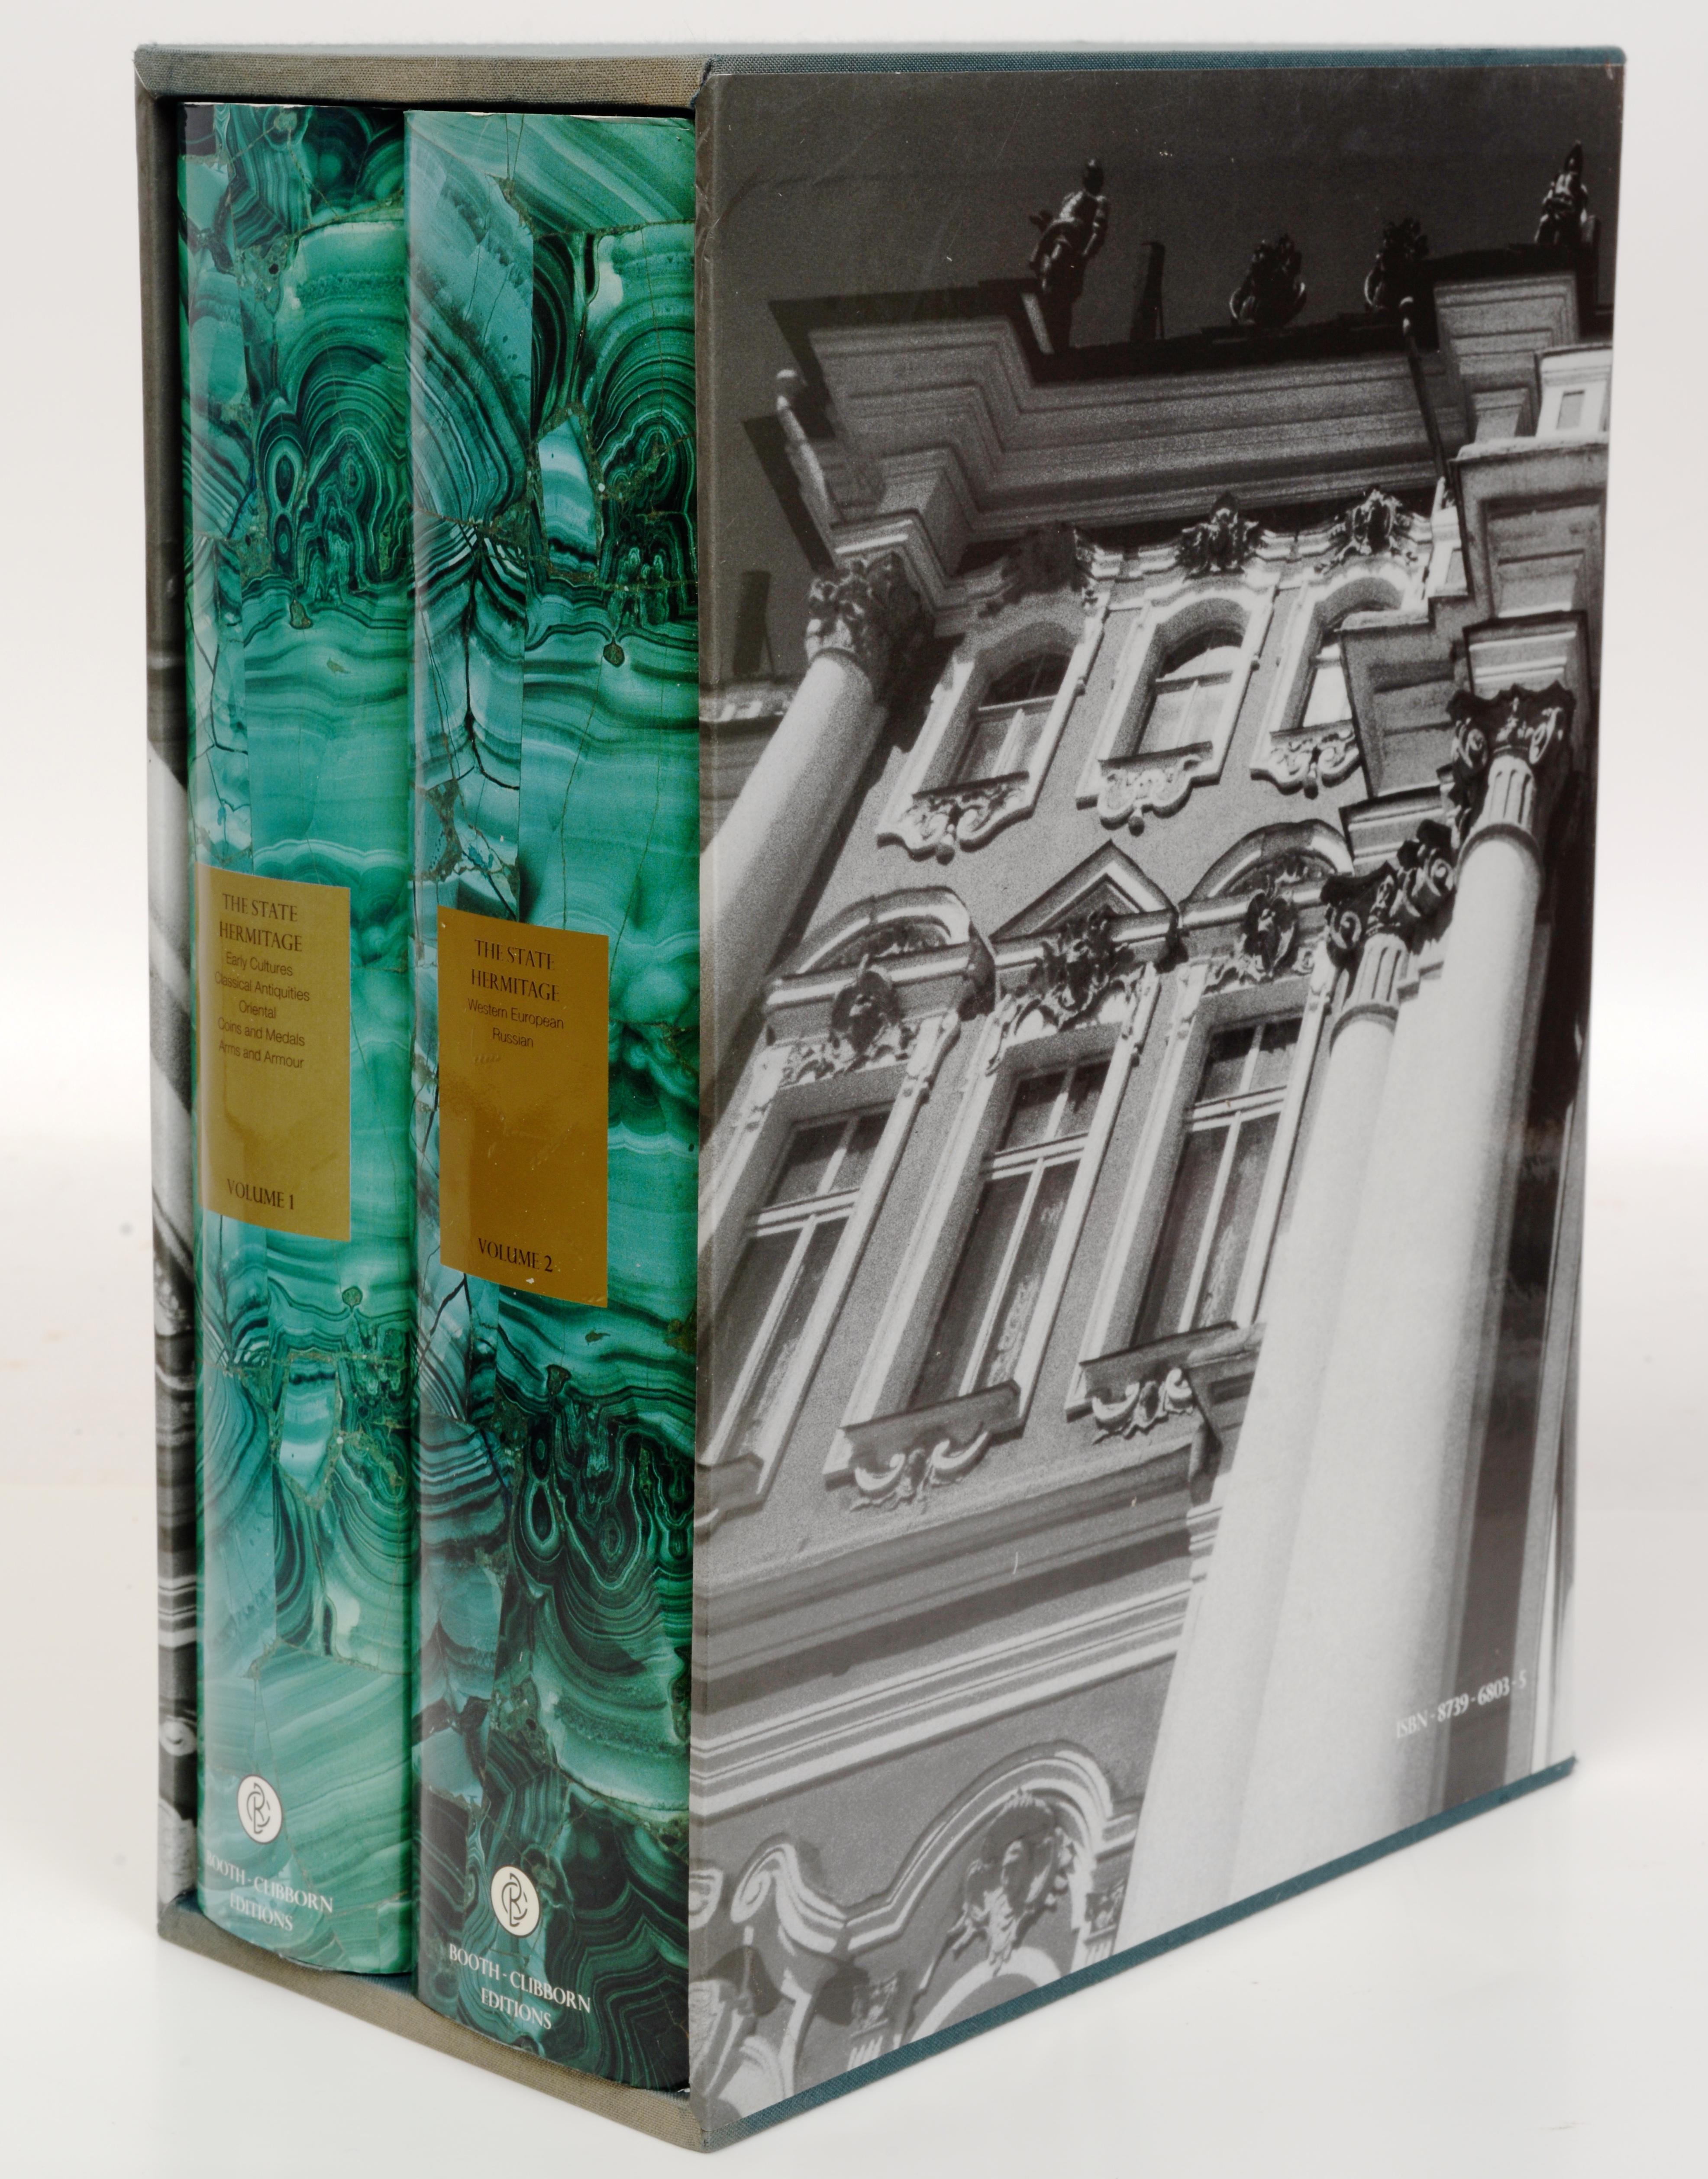 The State Hermitage: Masterpieces From the Museum's Collections by Mikhail B. Piotrovsky; Vitaly Suslov and Geraldine Norman. Published by Booth-Clibborn Editions, 2001. Pair of hardcovers with dust jackets and slipcase. Back in print following the